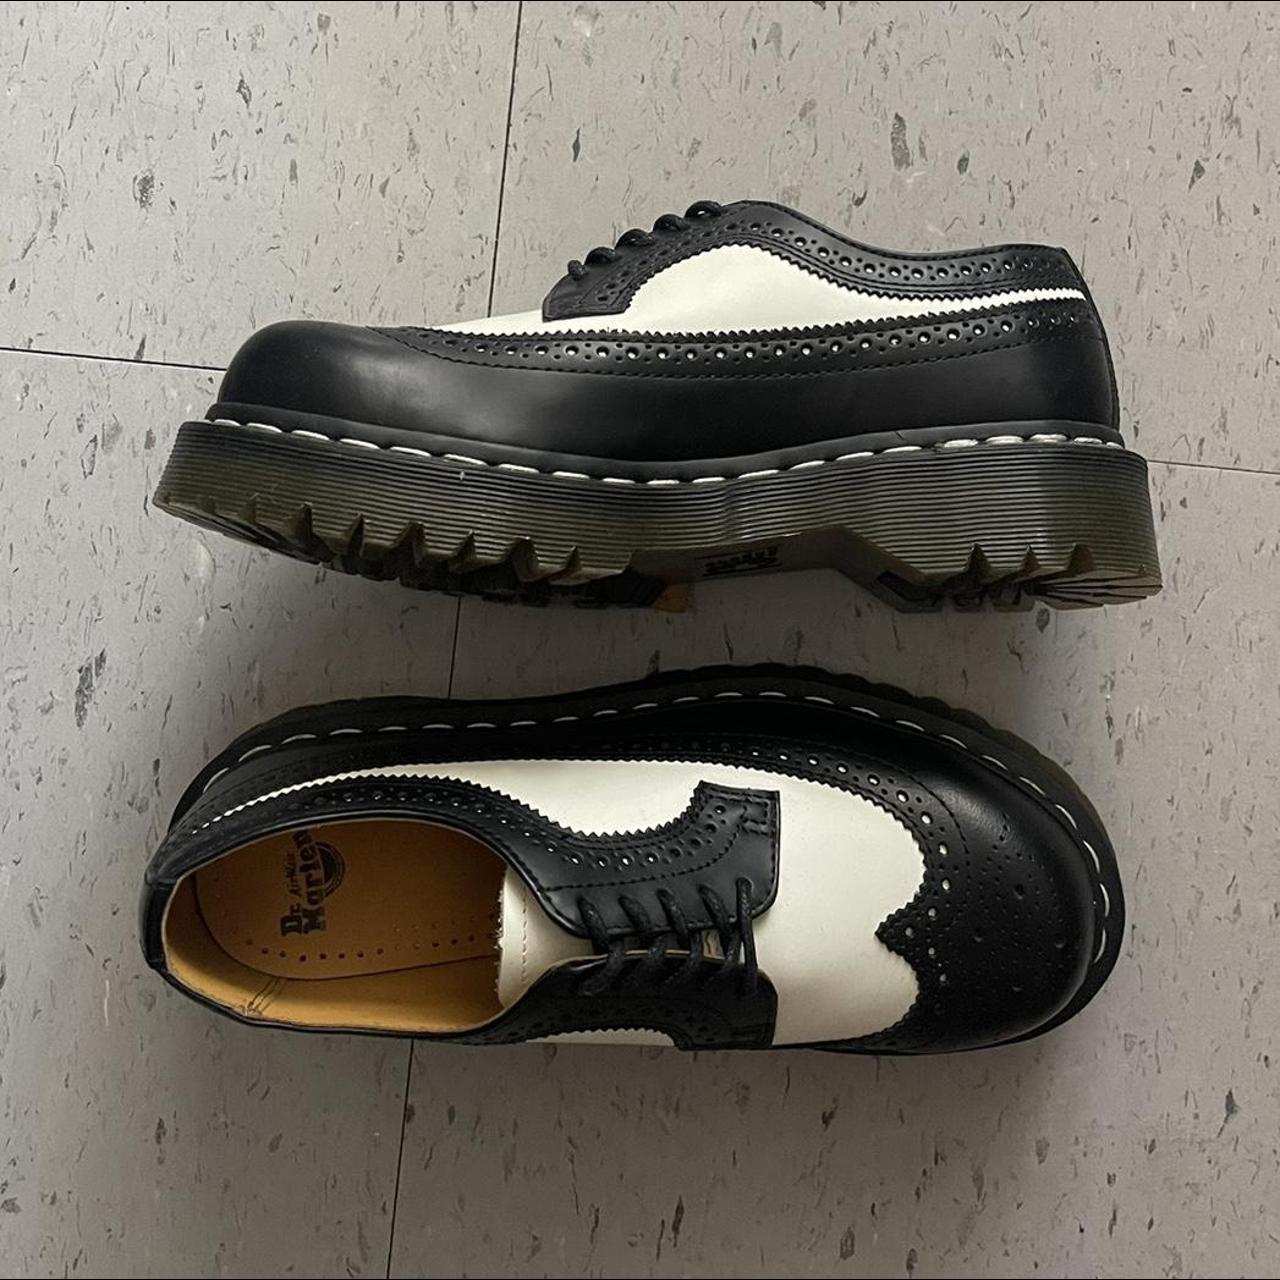 Dr. Martens Women's Black and White Boots (3)